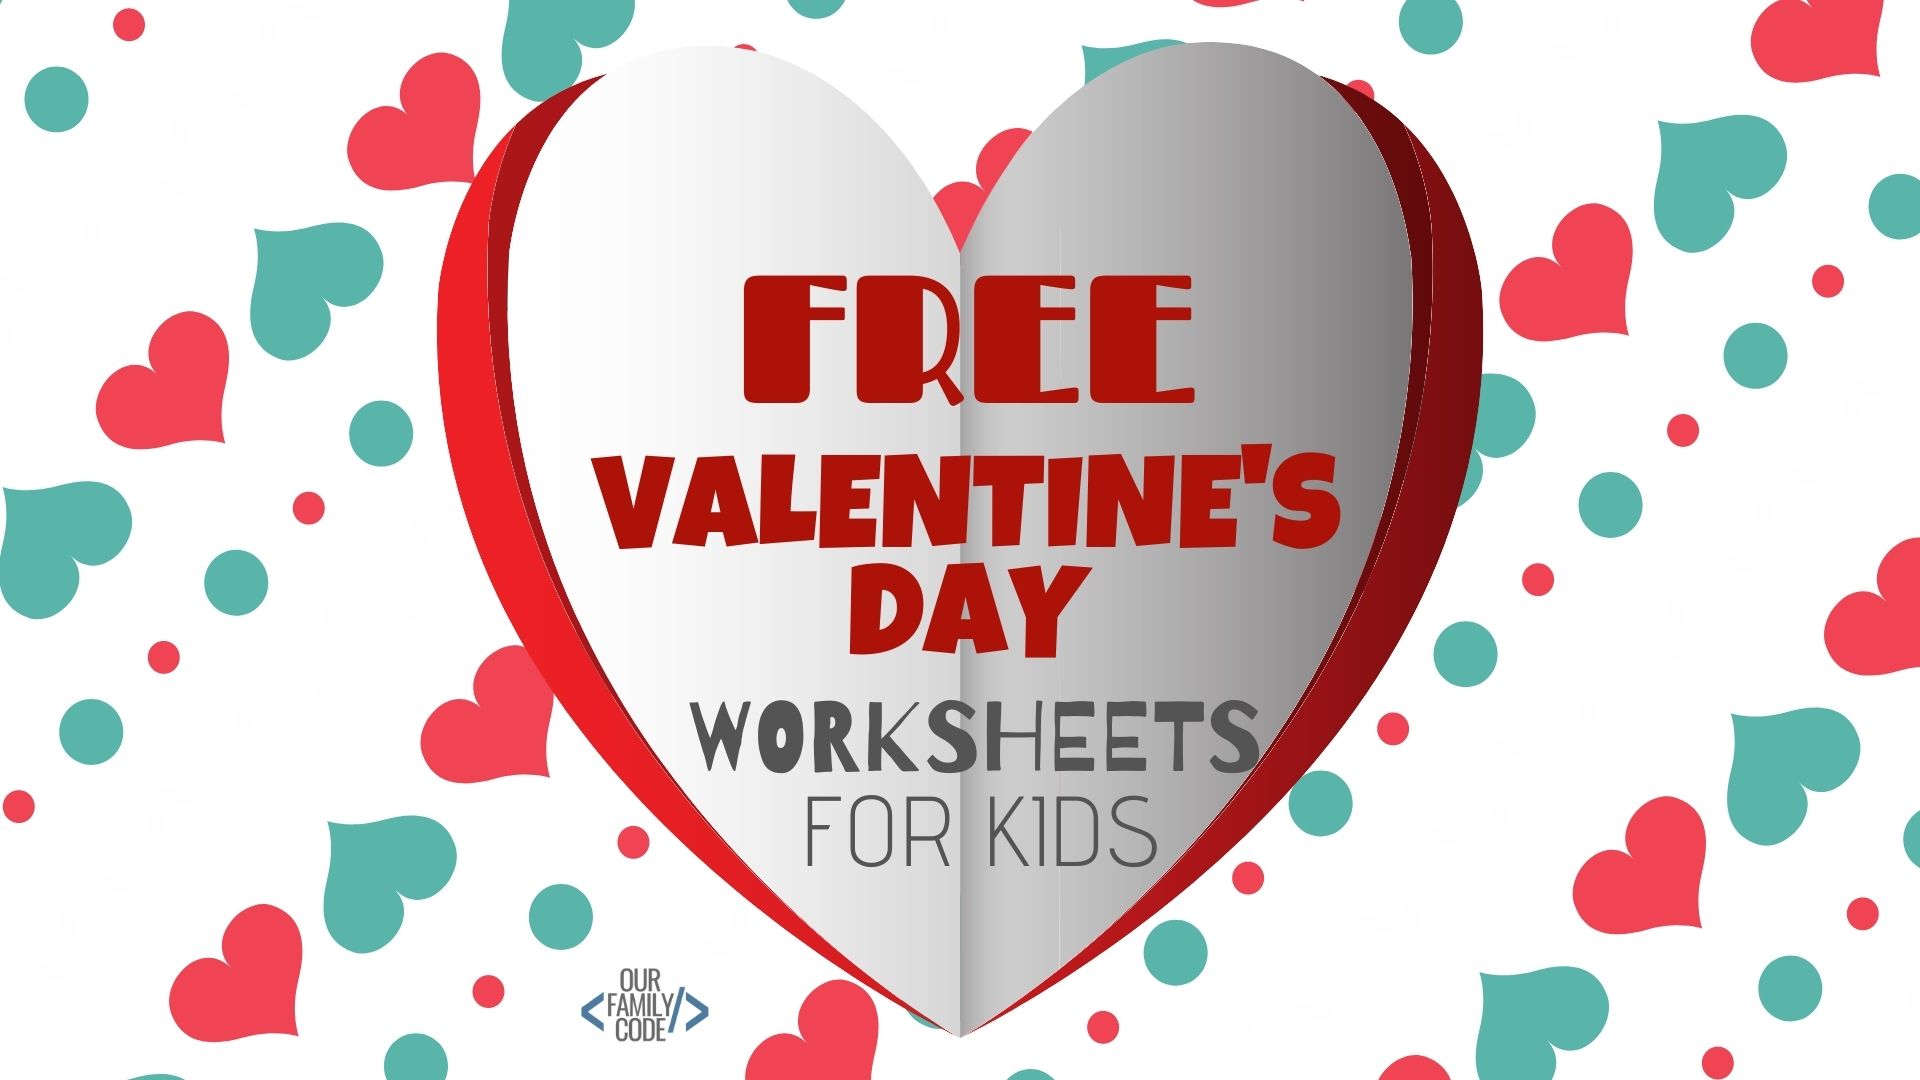 Free Valentine's Day worksheets for kids: I-Spy, Number Recognition, Letter Recognition, Less Than or Greater Than Hearts from Our Family Code! #easykidworksheets #Winterprintables #freekidactivities #freekidprintables #freepreschoolworksheets #winterworksheets #ValentinesDayforKids #ValentinesDayworksheets #freekidworksheets